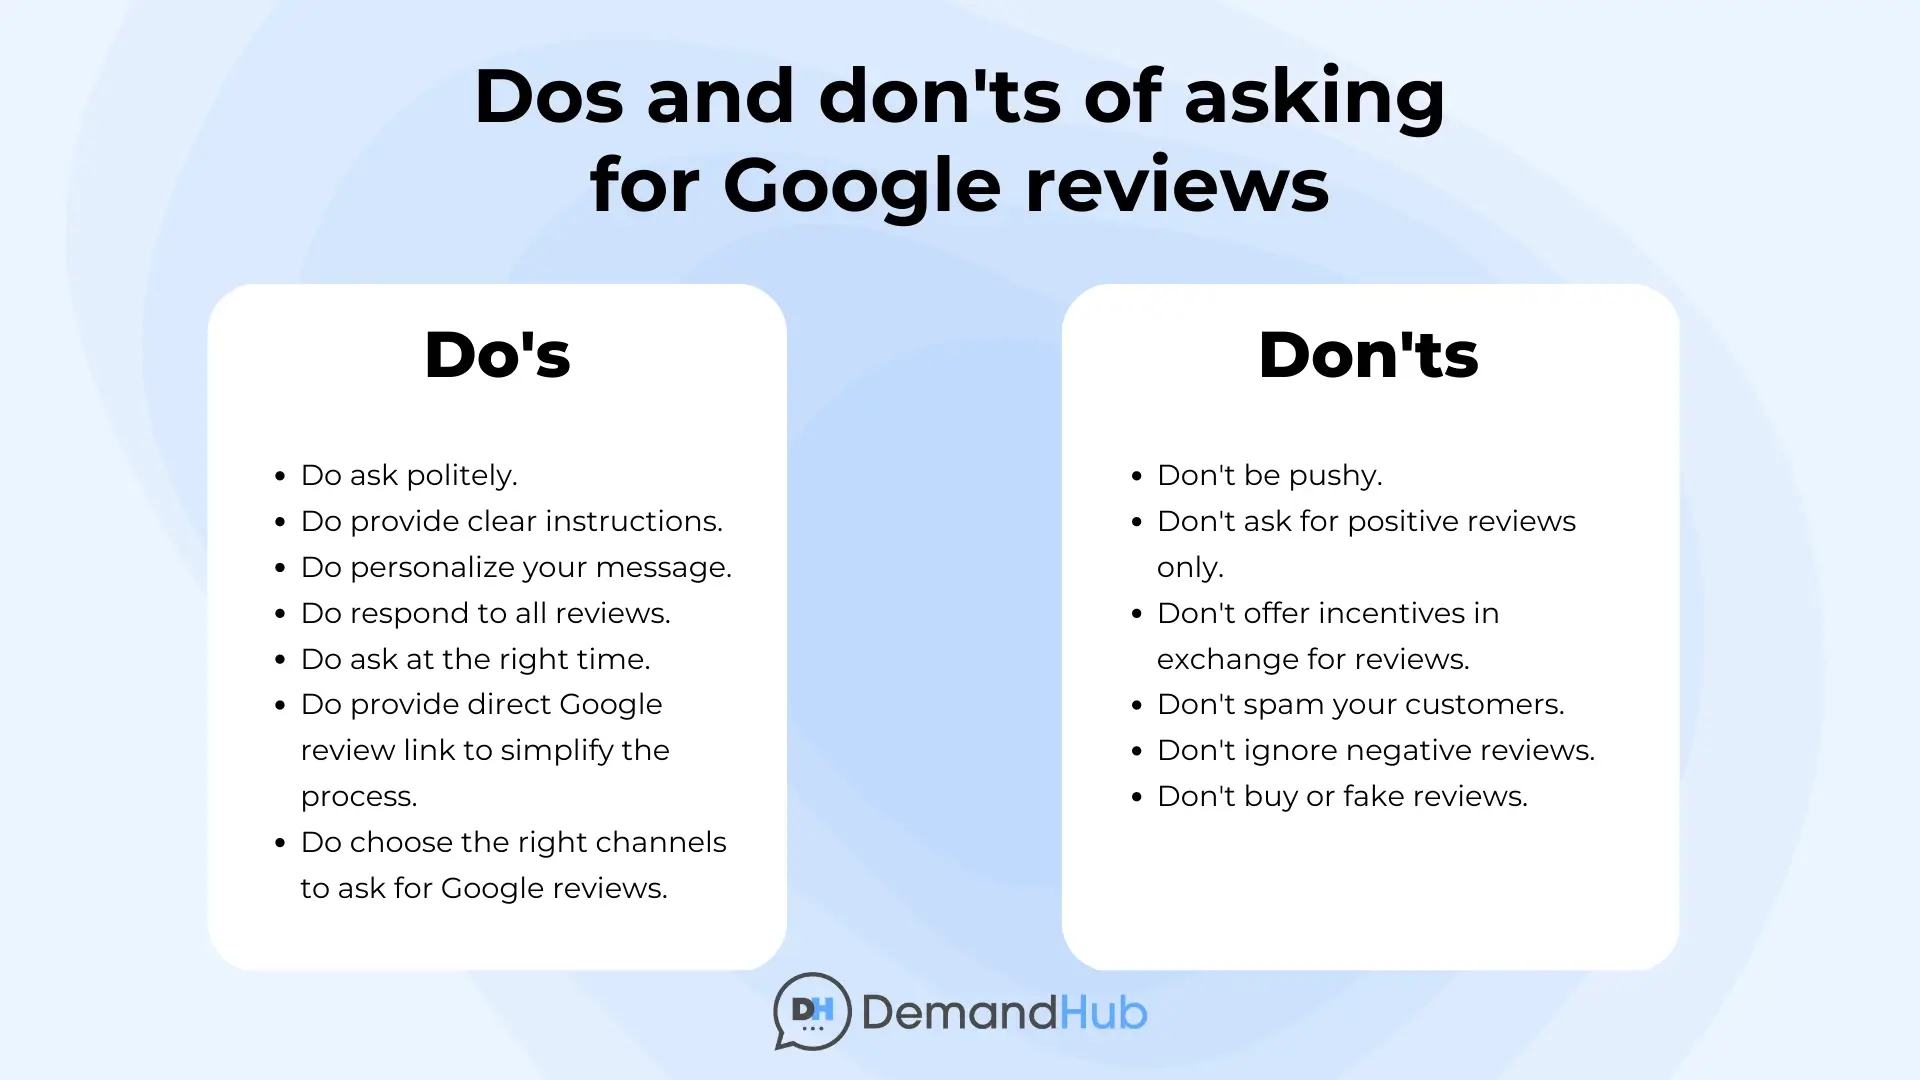 Dos and don'ts of asking for Google reviews